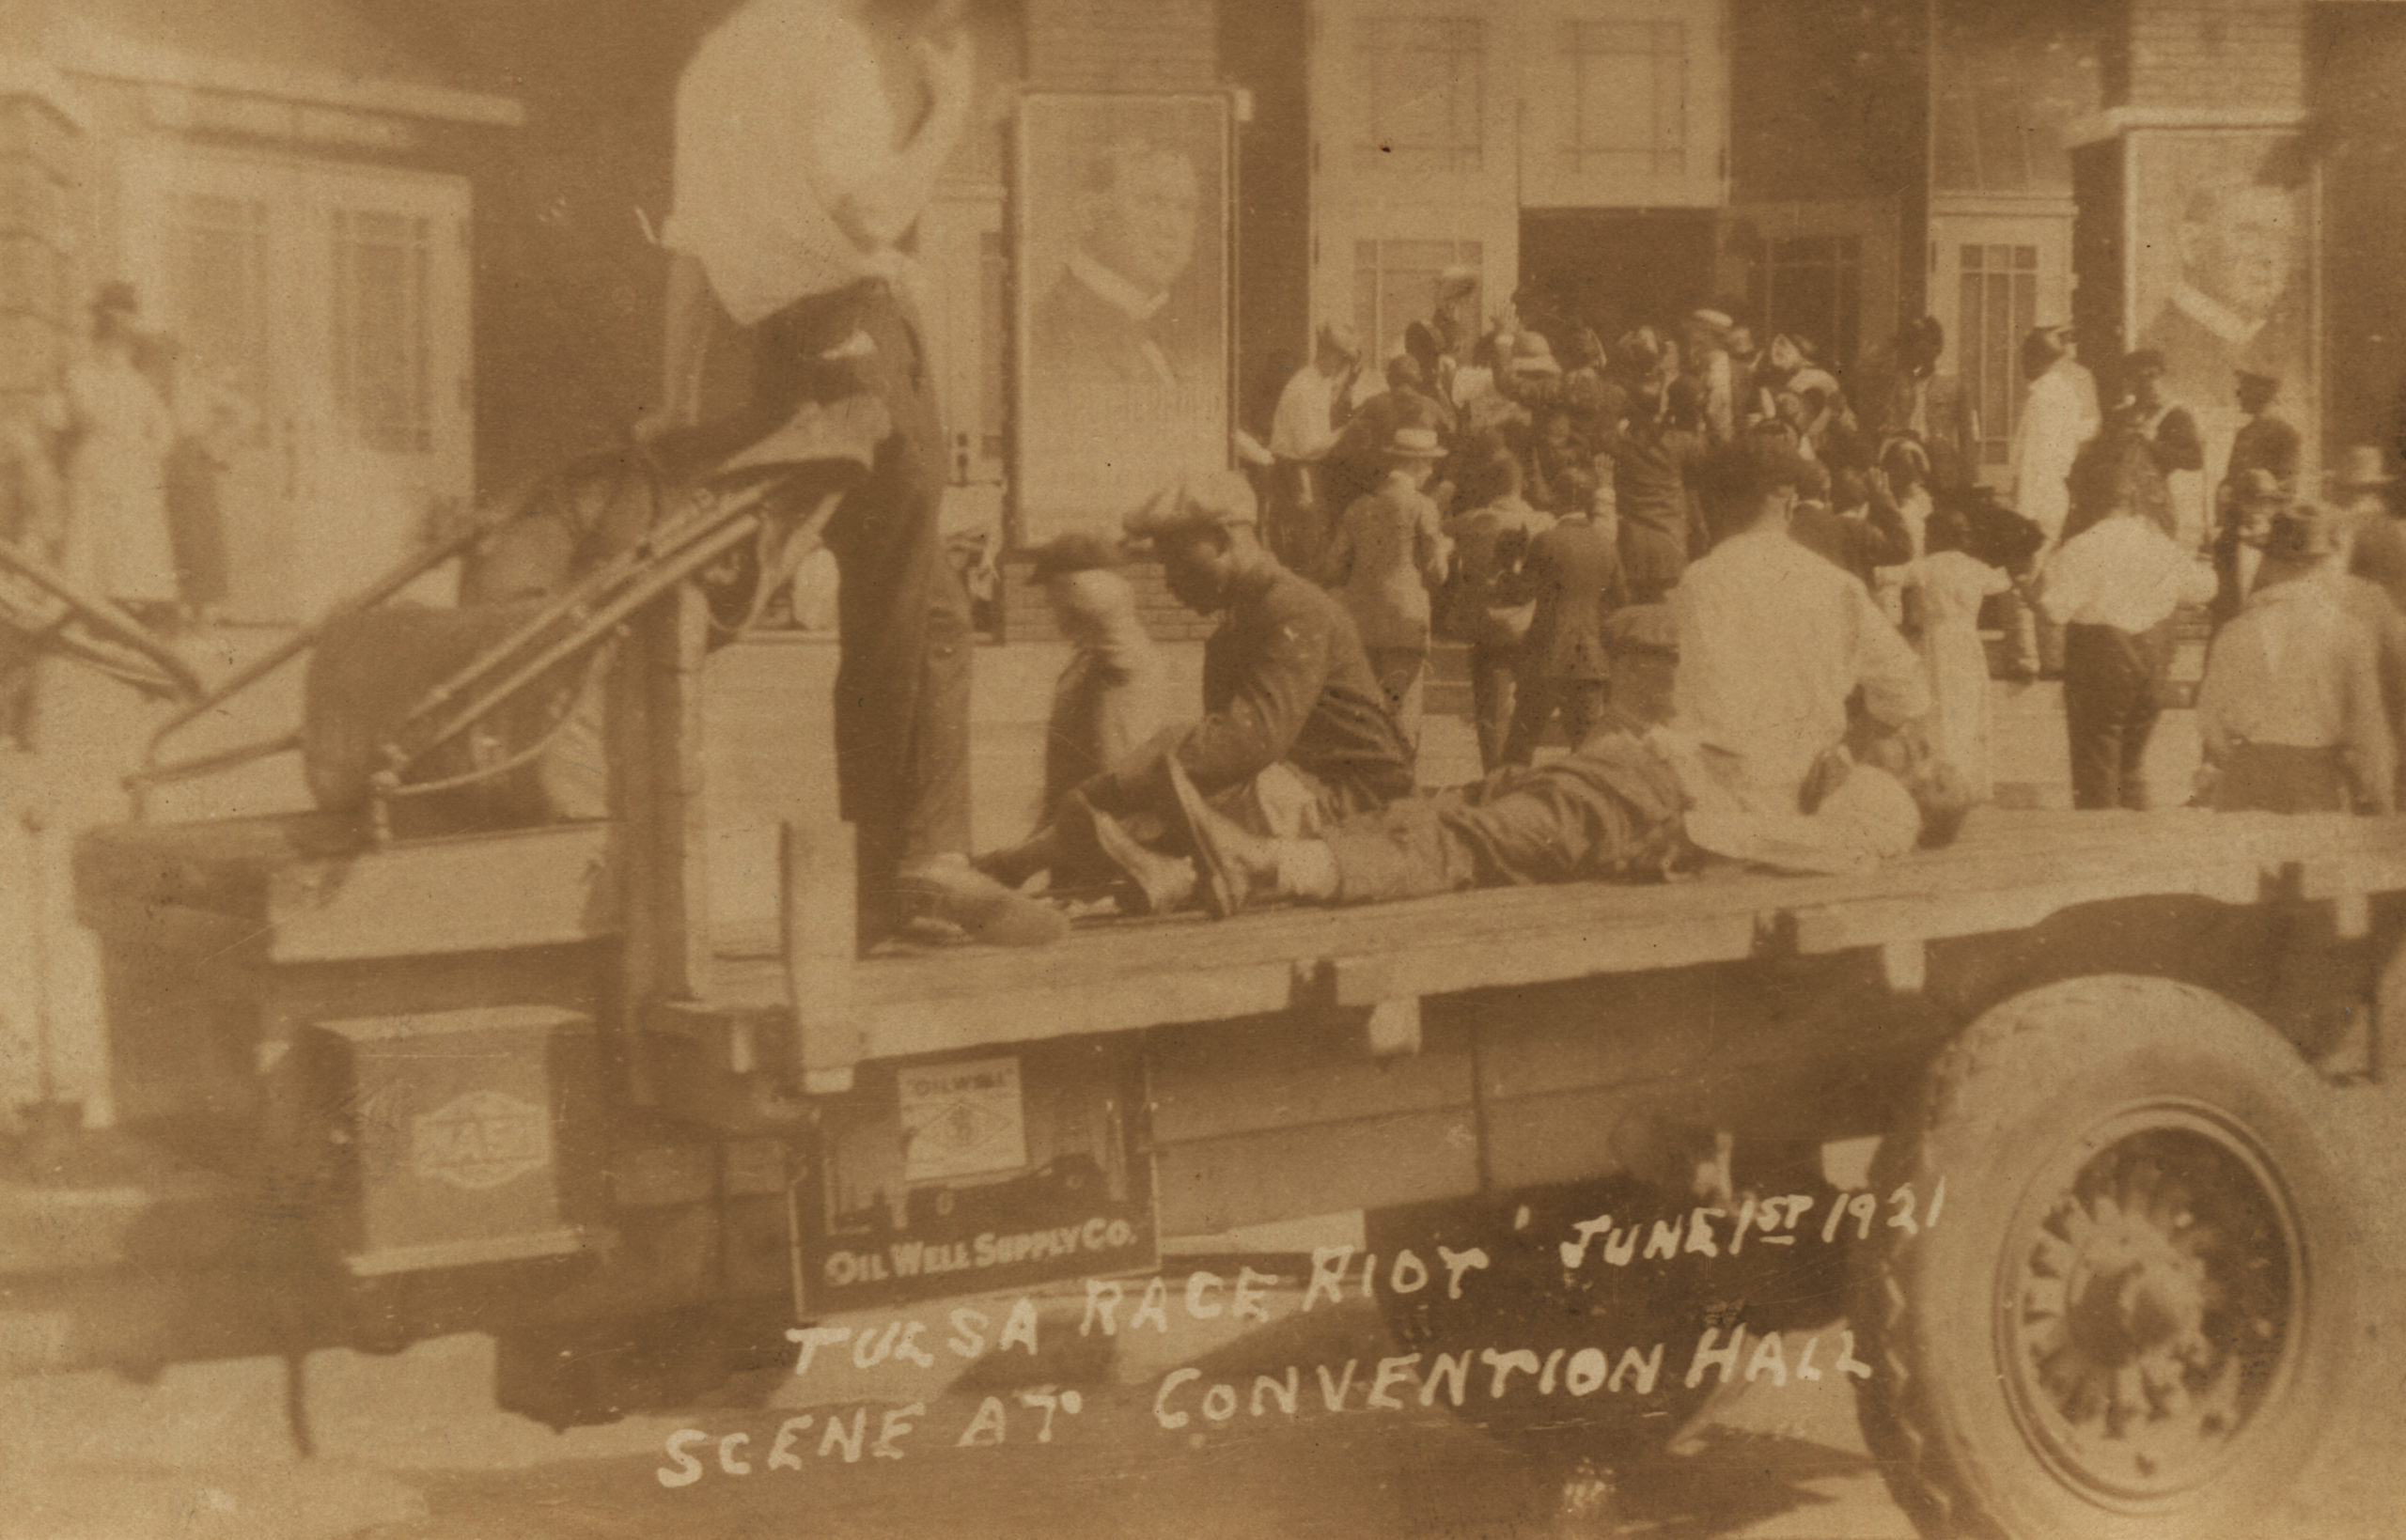 A postcard showing a truck parked in front of the Convention Hall. One man lies on the bed of the truck, either wounded or dead, while two others sit to either side. A man in civilian attire stands guard over them.